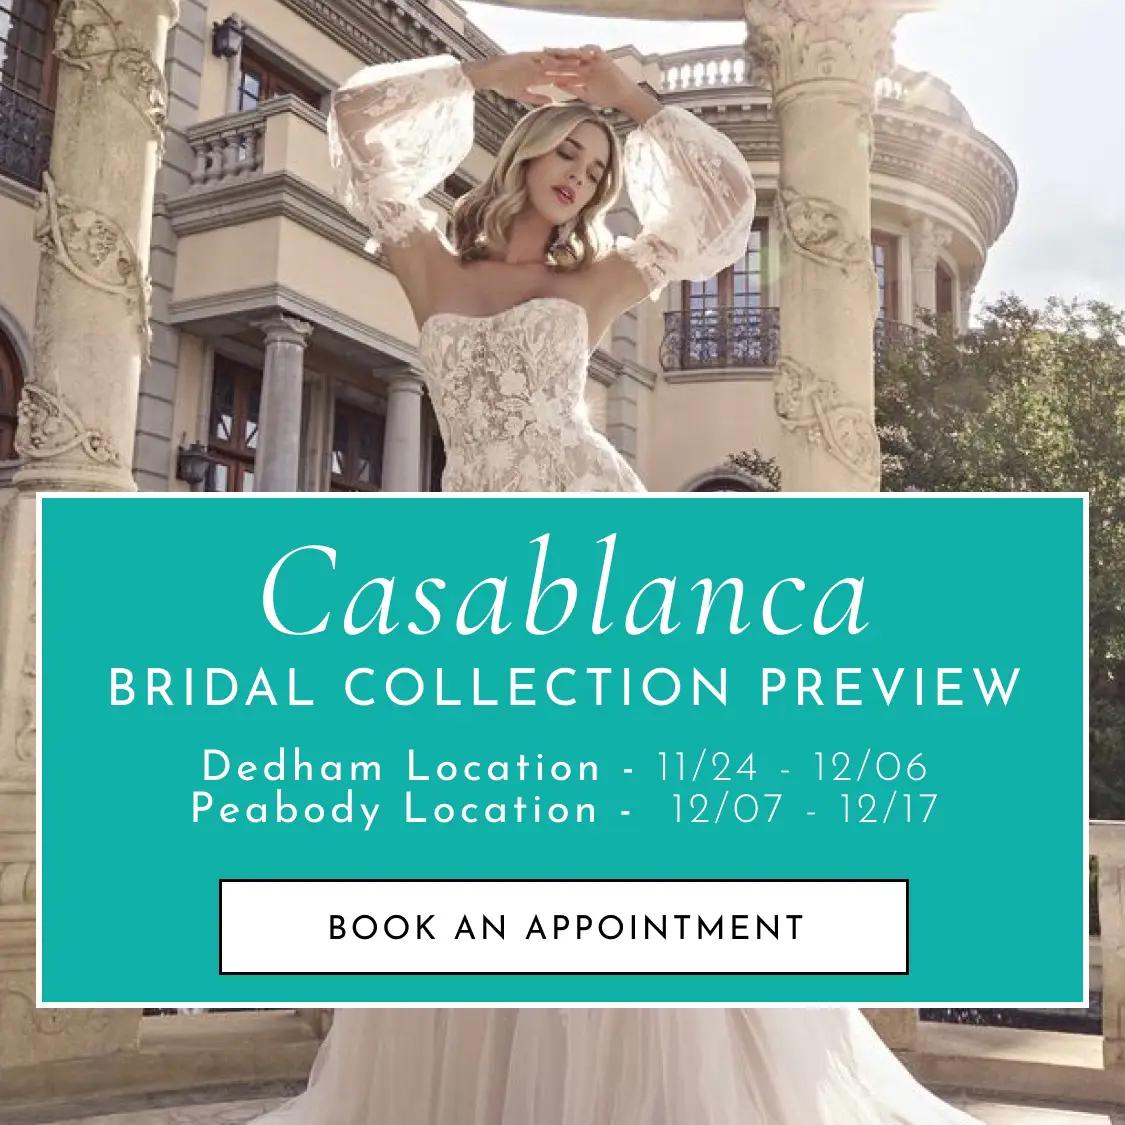 Casablanca bridal collection preview event at The Ultimate Bridal locations